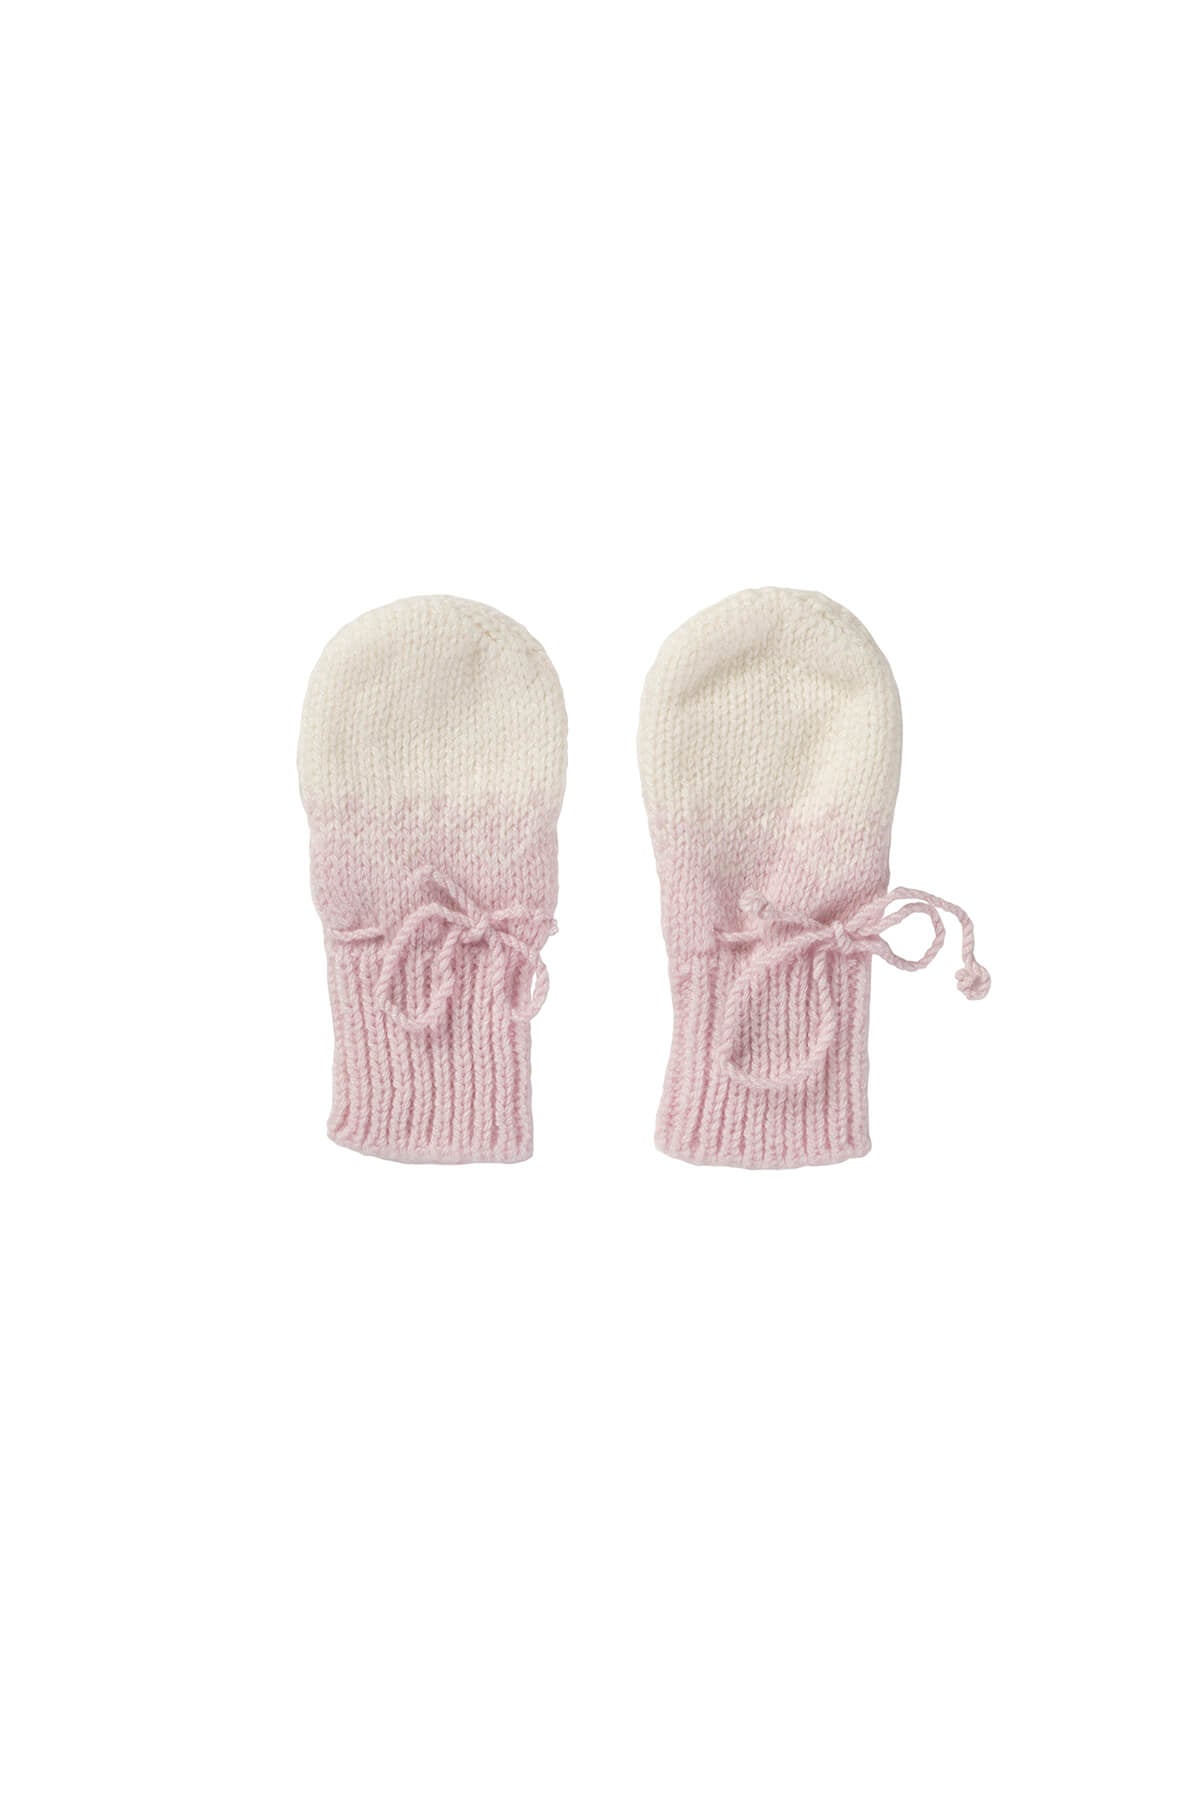 Johnstons of Elgin Gift Set includes our Cashmere Ombre Baby Hat, Mittens & Booties in Blush on white AW21GIFTSET22B